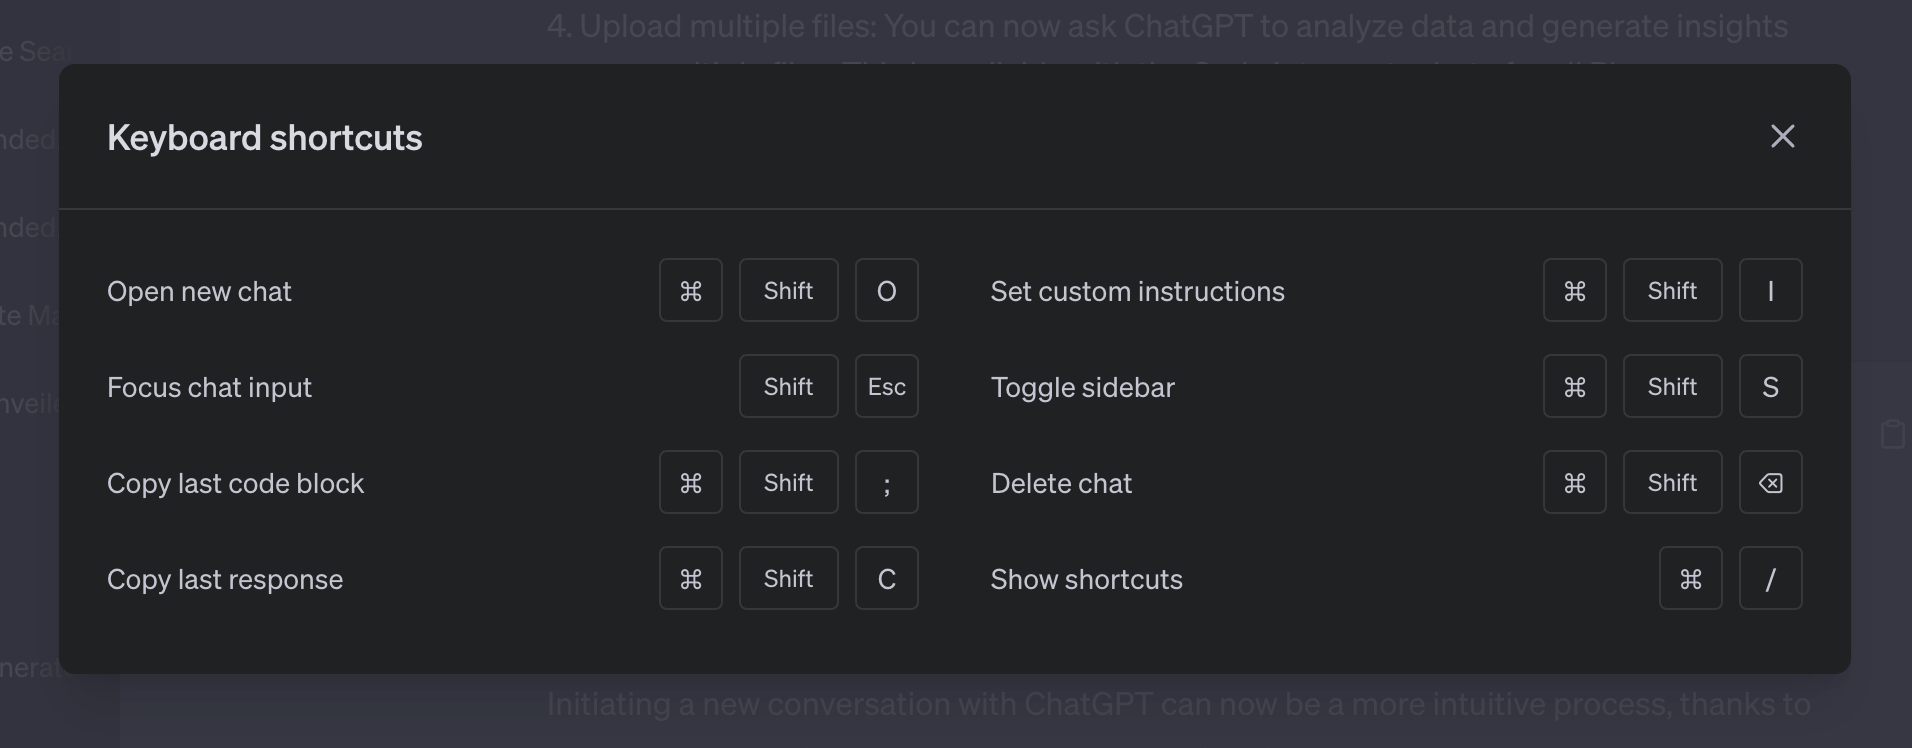 6 New ChatGPT Features Include Prompt Examples & File Uploads